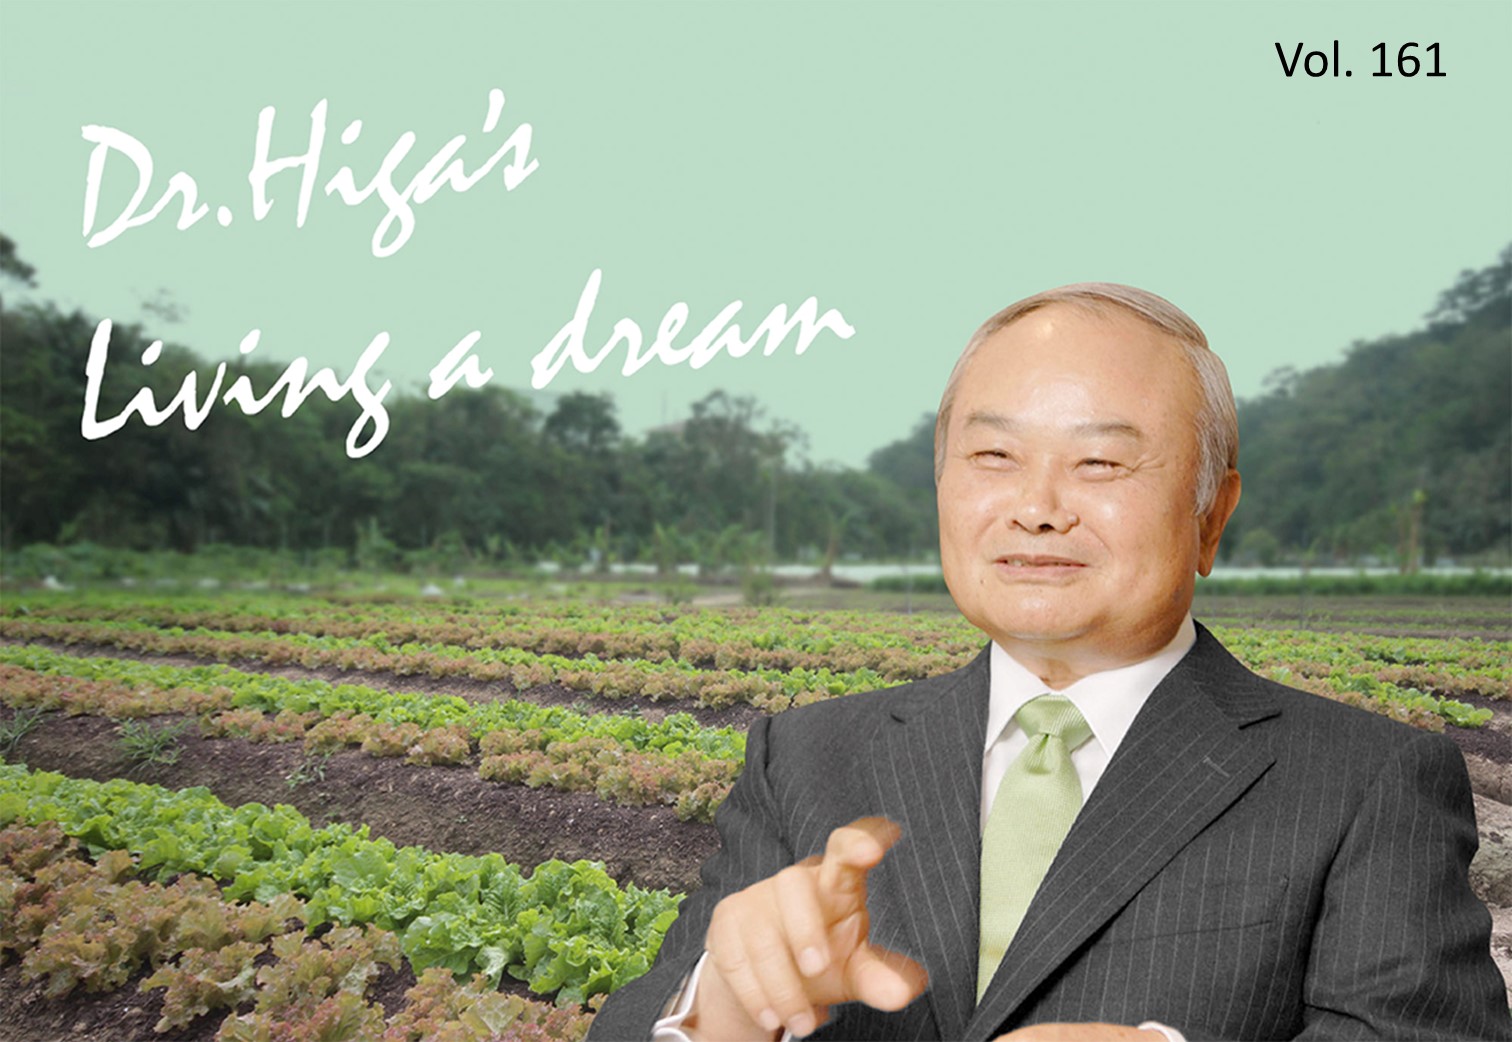 Dr. Higa's "Living a Dream": The latest article #161 is UP!!